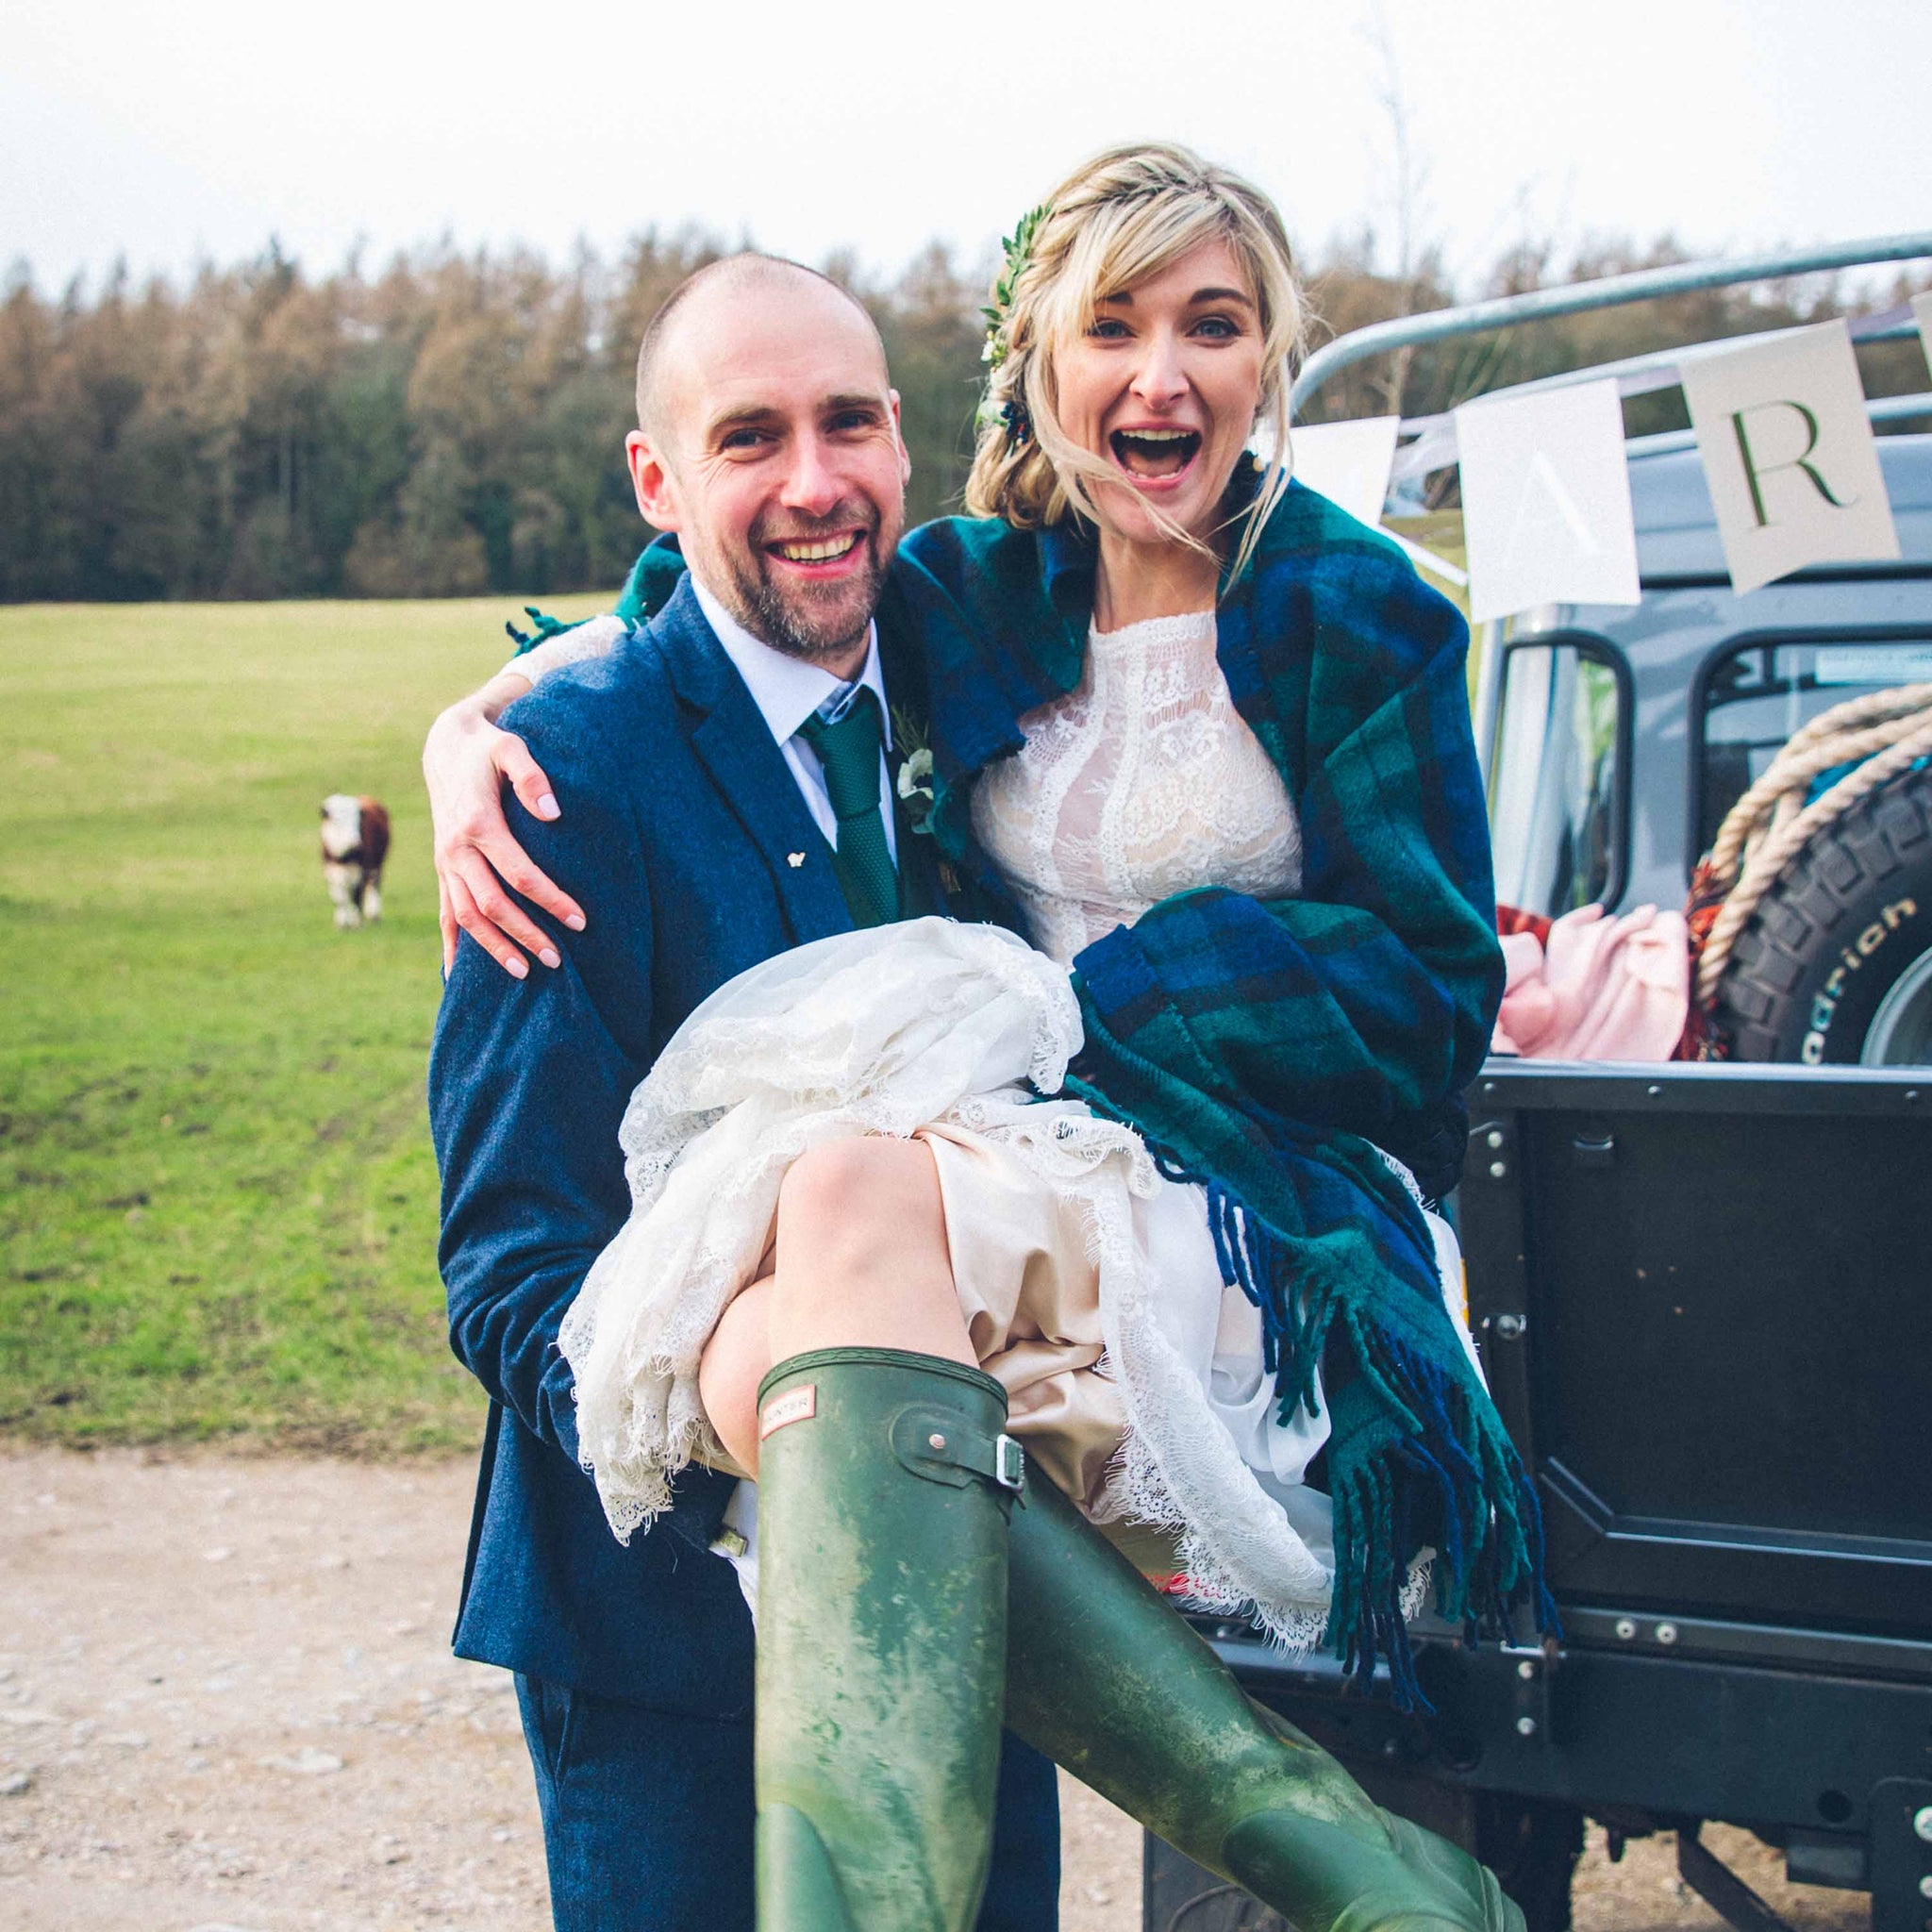 bride carried by groom. She is wearing a wedding dress and green wellington boots